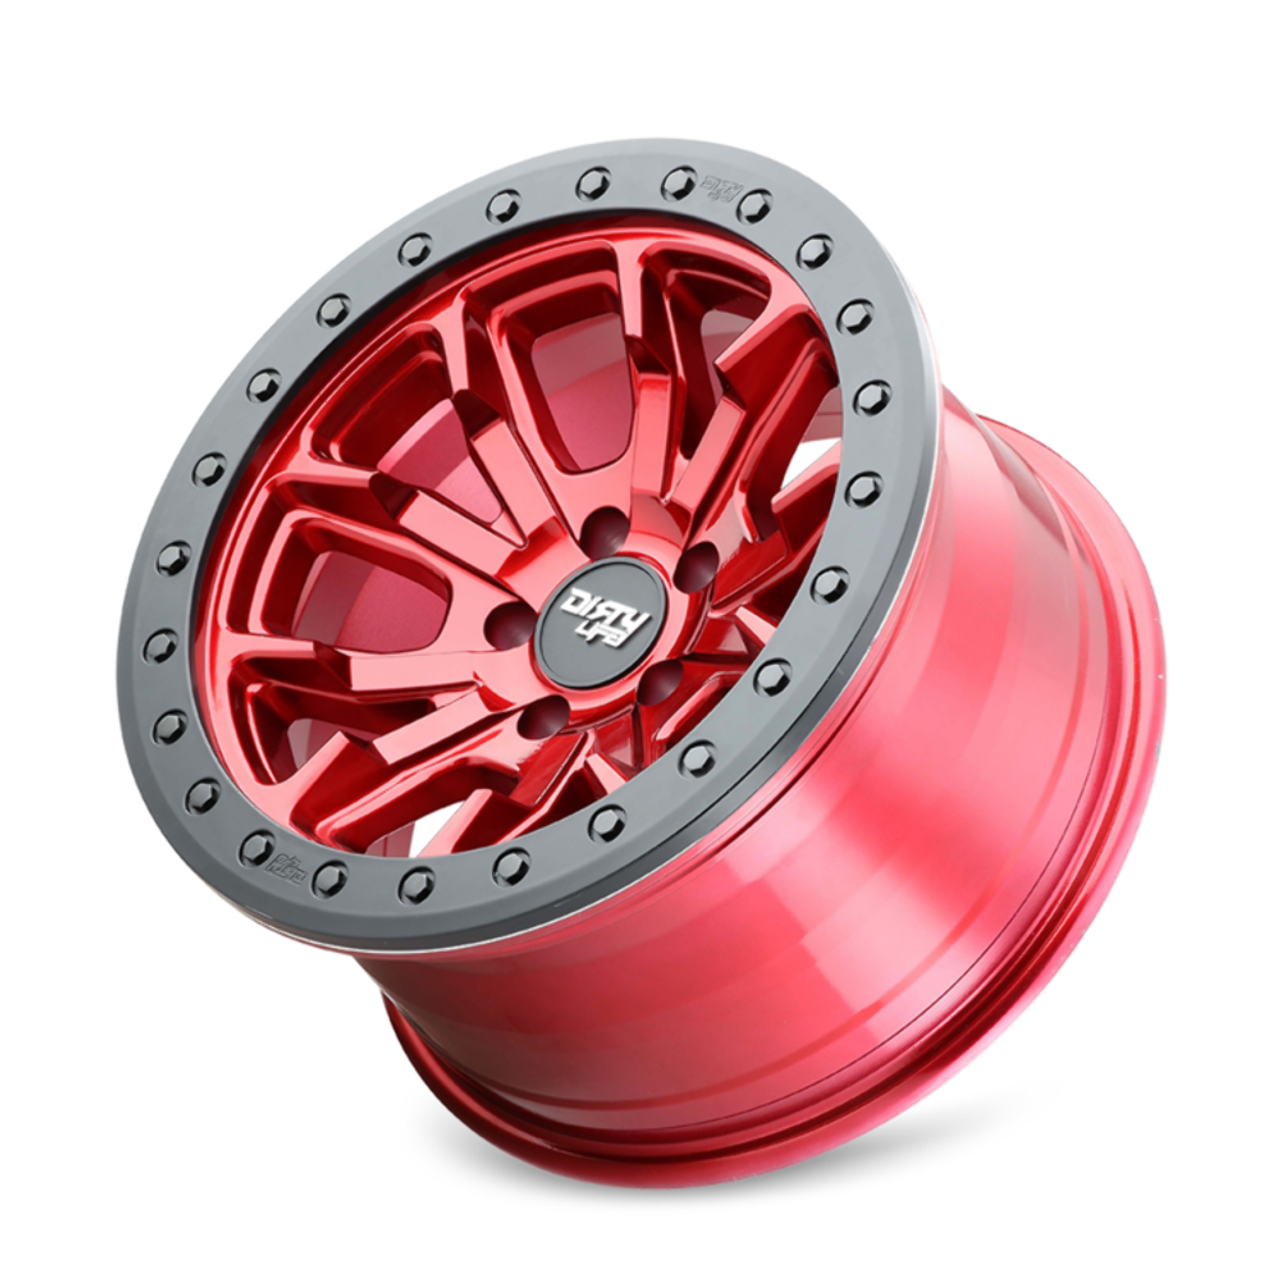 17" Dirty Life Dt-1 17x9 Crimson Candy Red 5x5.5 Wheel -12mm For Dodge Ram Rim